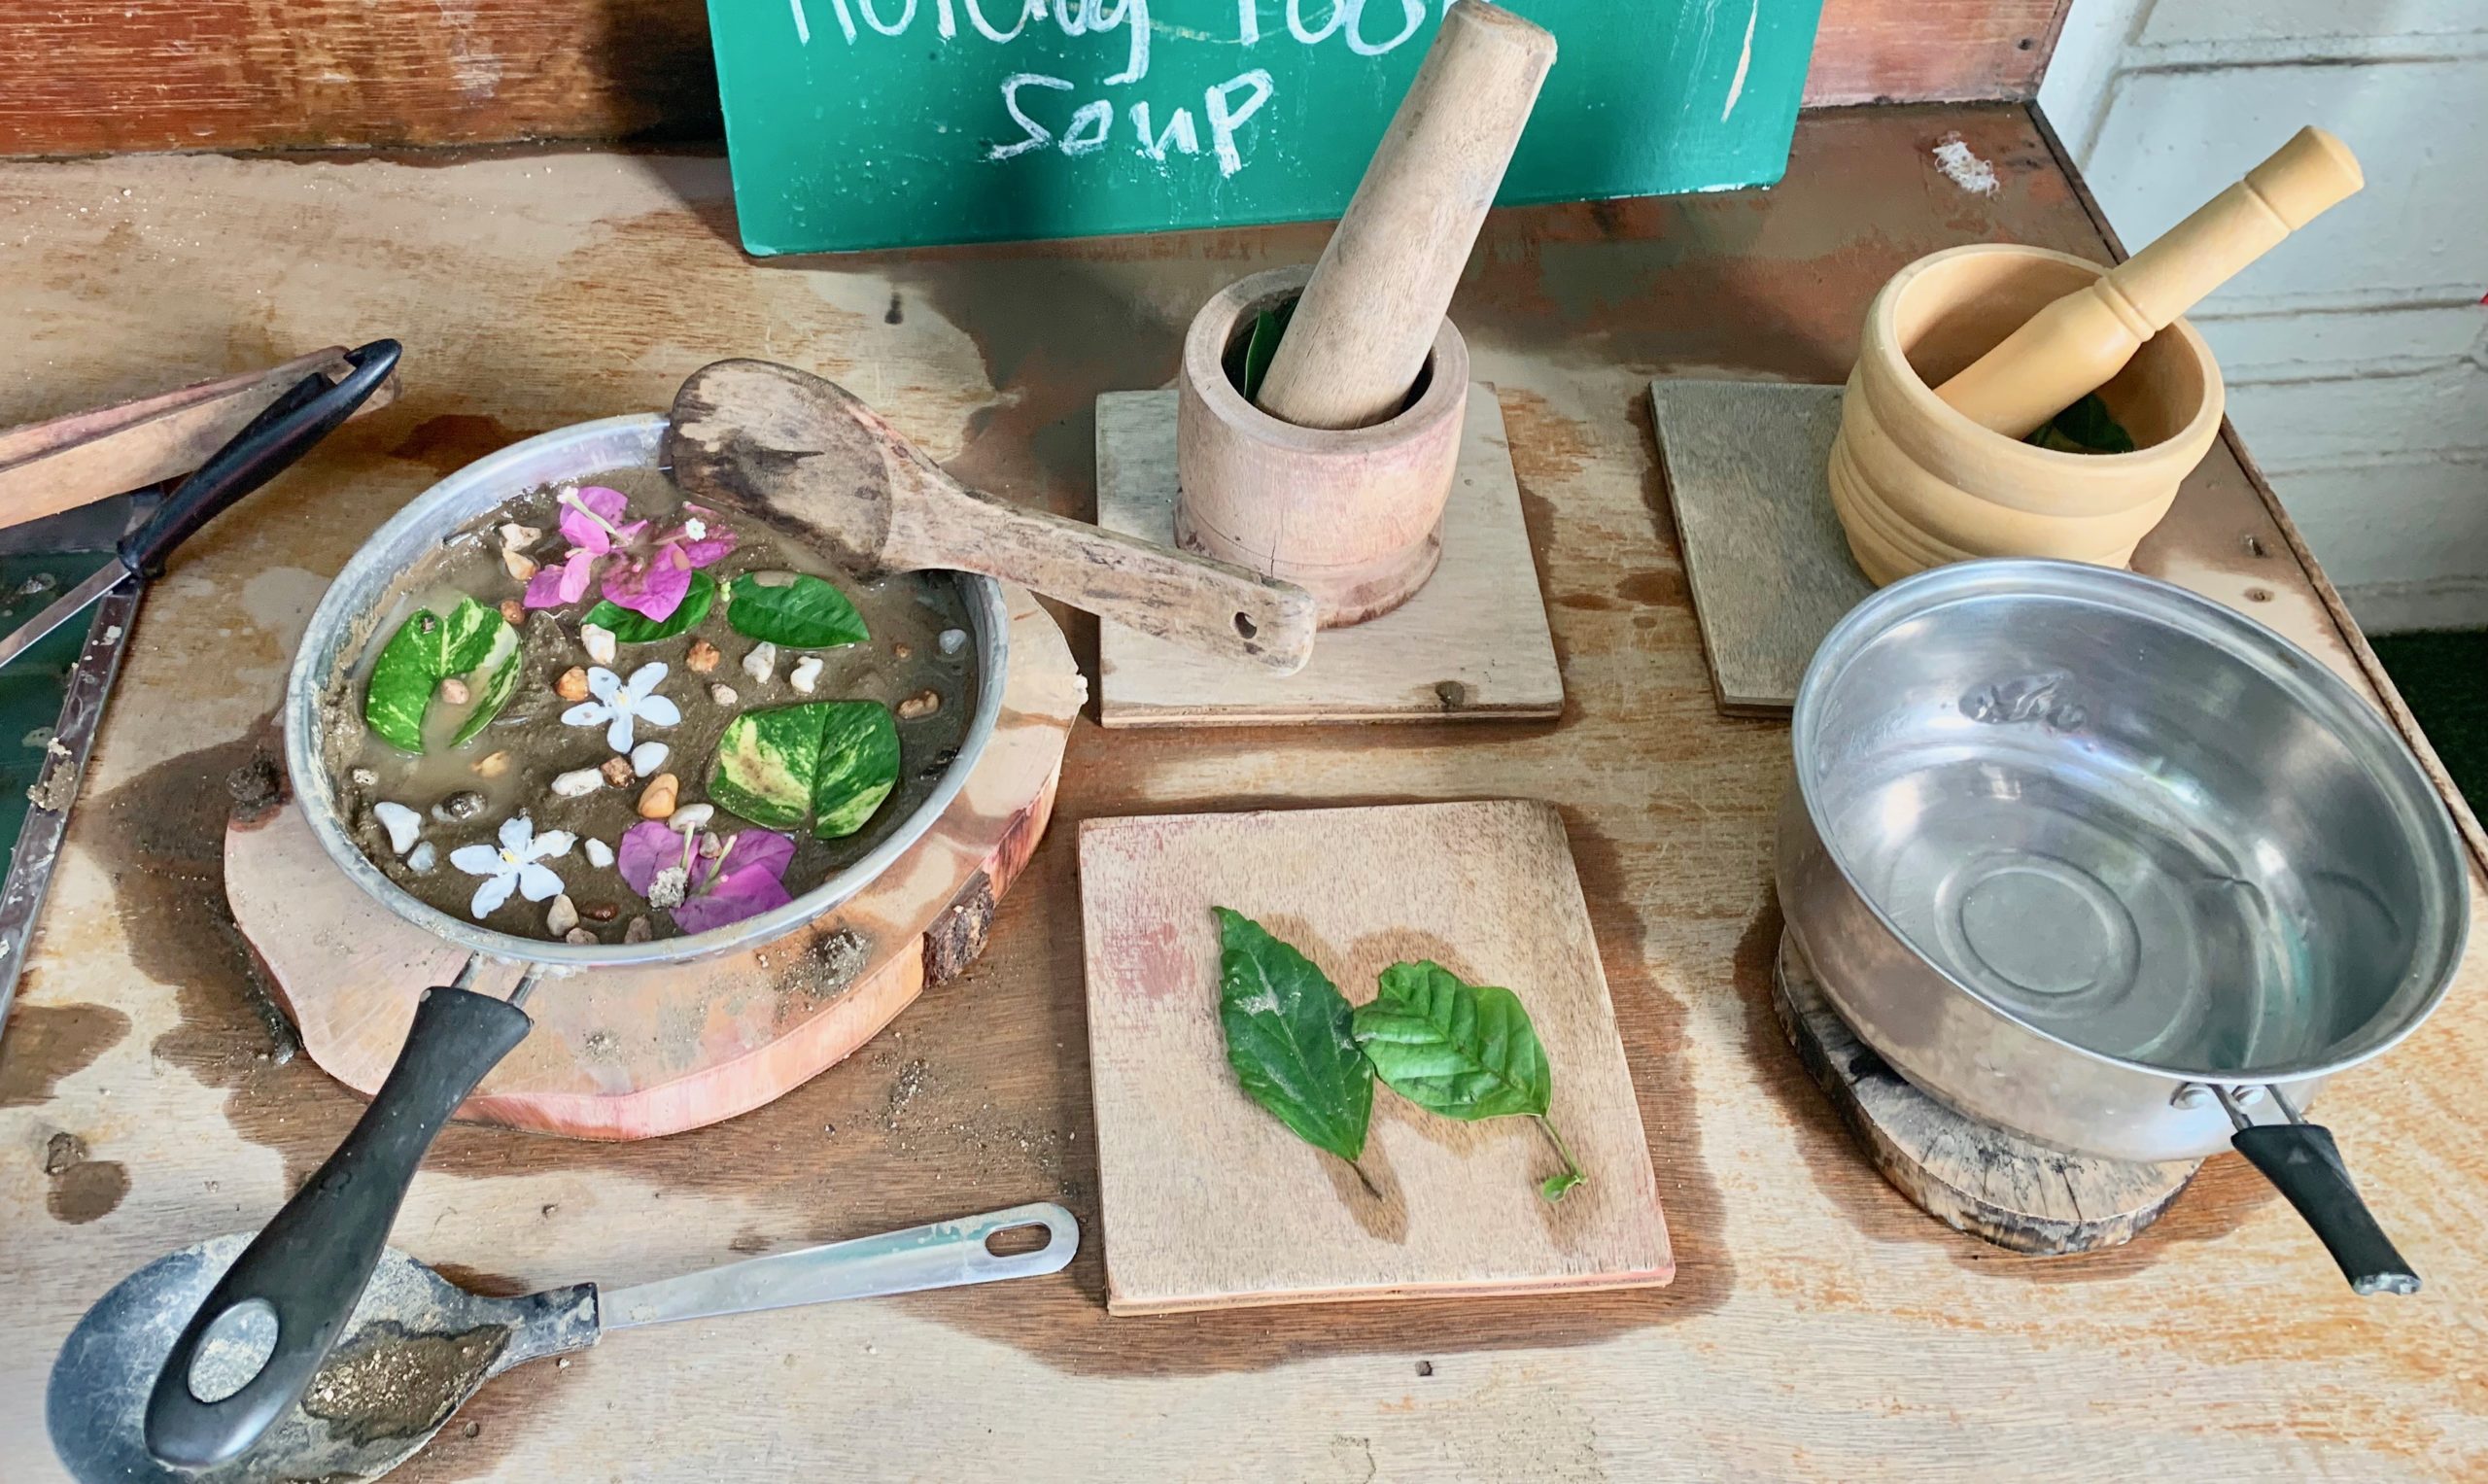 mortar and pestles in mud kitchen